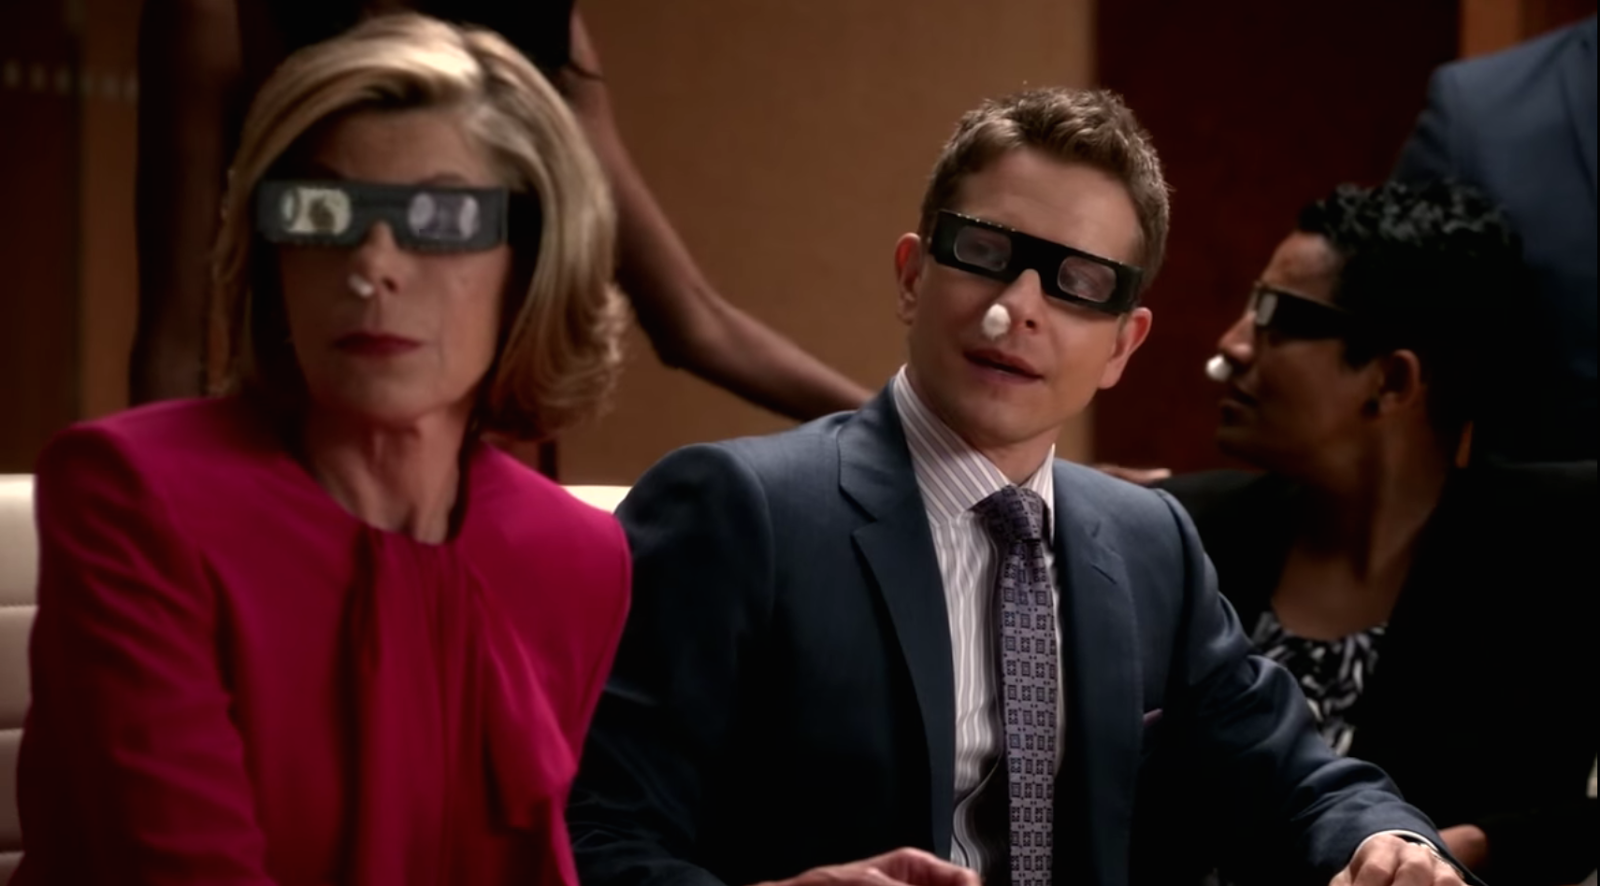 The Good Wife - Payback - Review: "We Need To Part Ways"